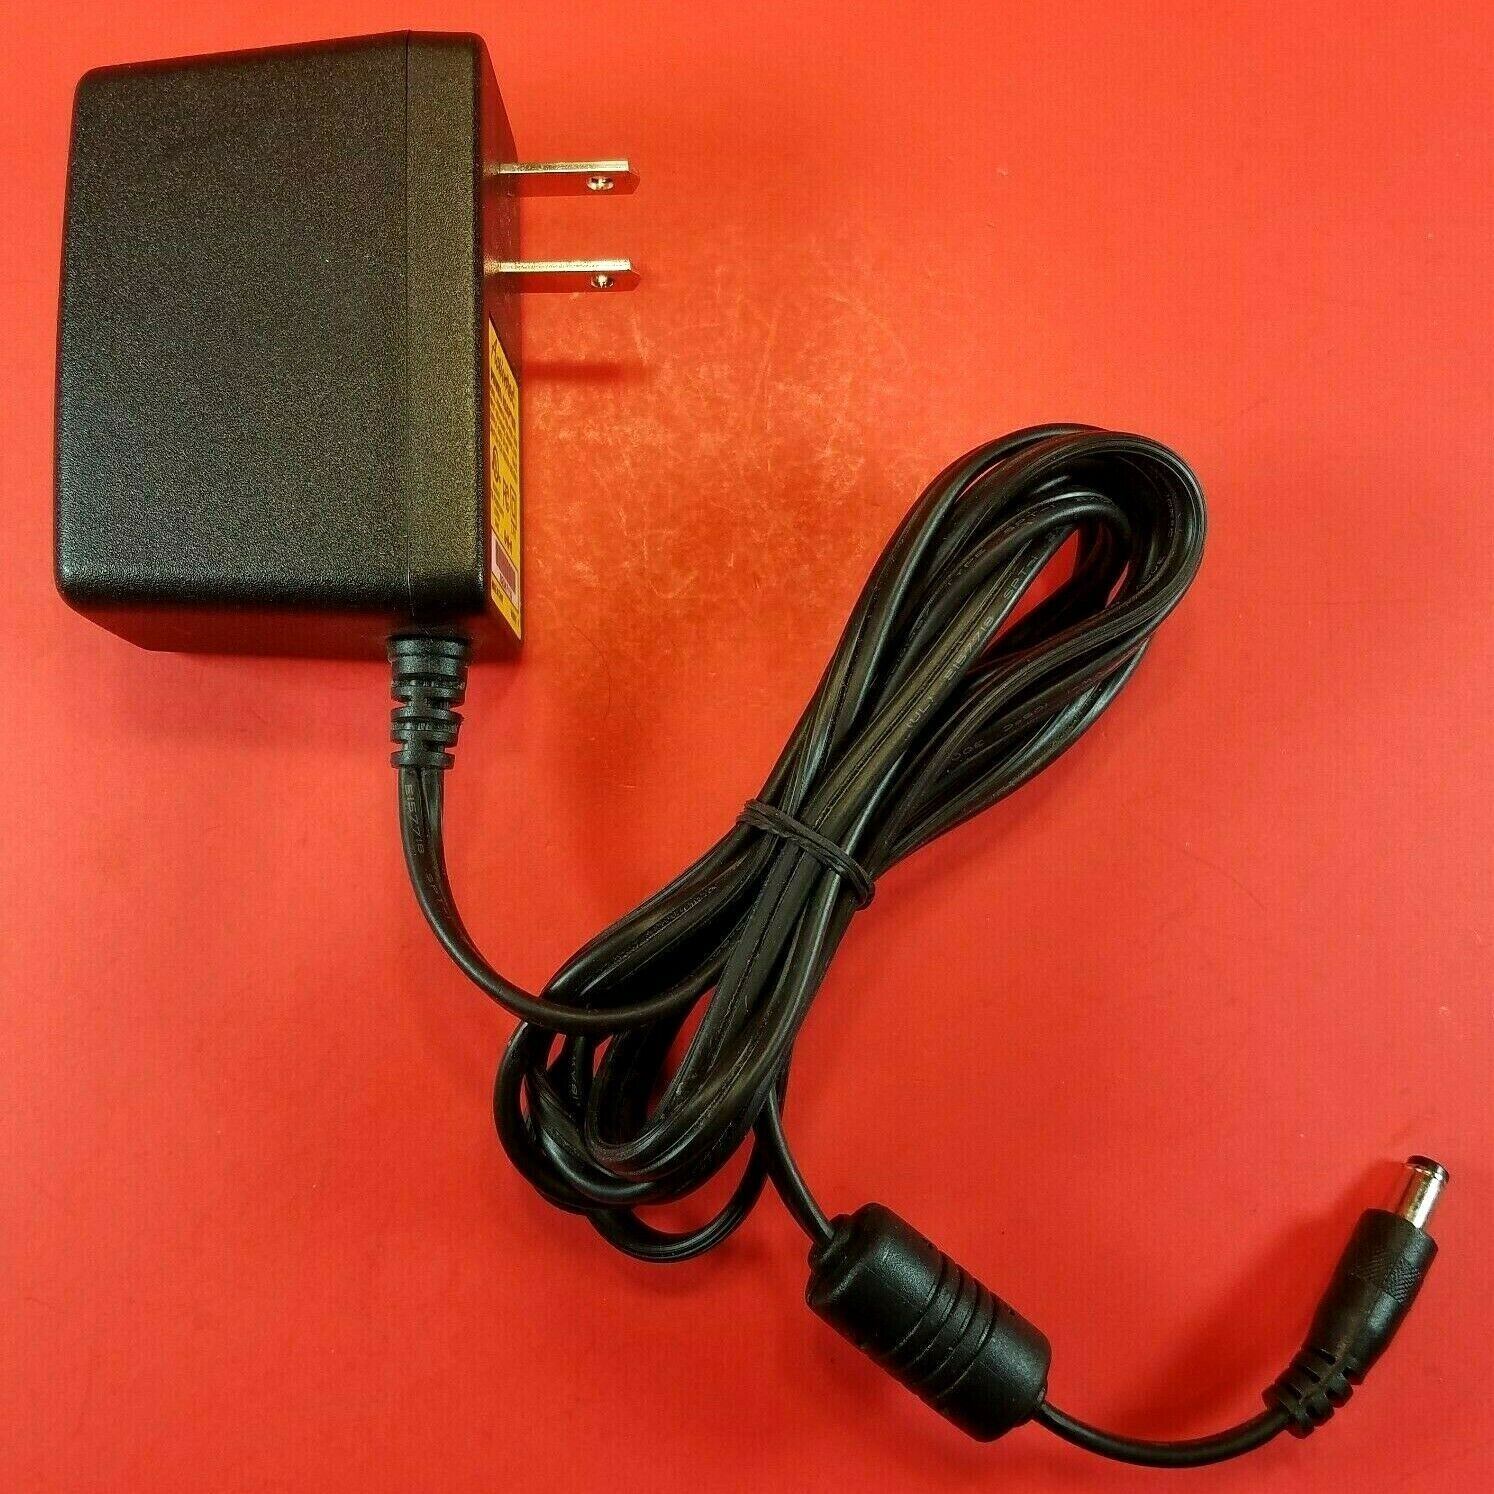 Actiontec ADS6818-1505-WDB Power Supply Adaptor 5V 3A OEM AC/DC Adapter MI424WR Type: Power Adapter Output Voltage: